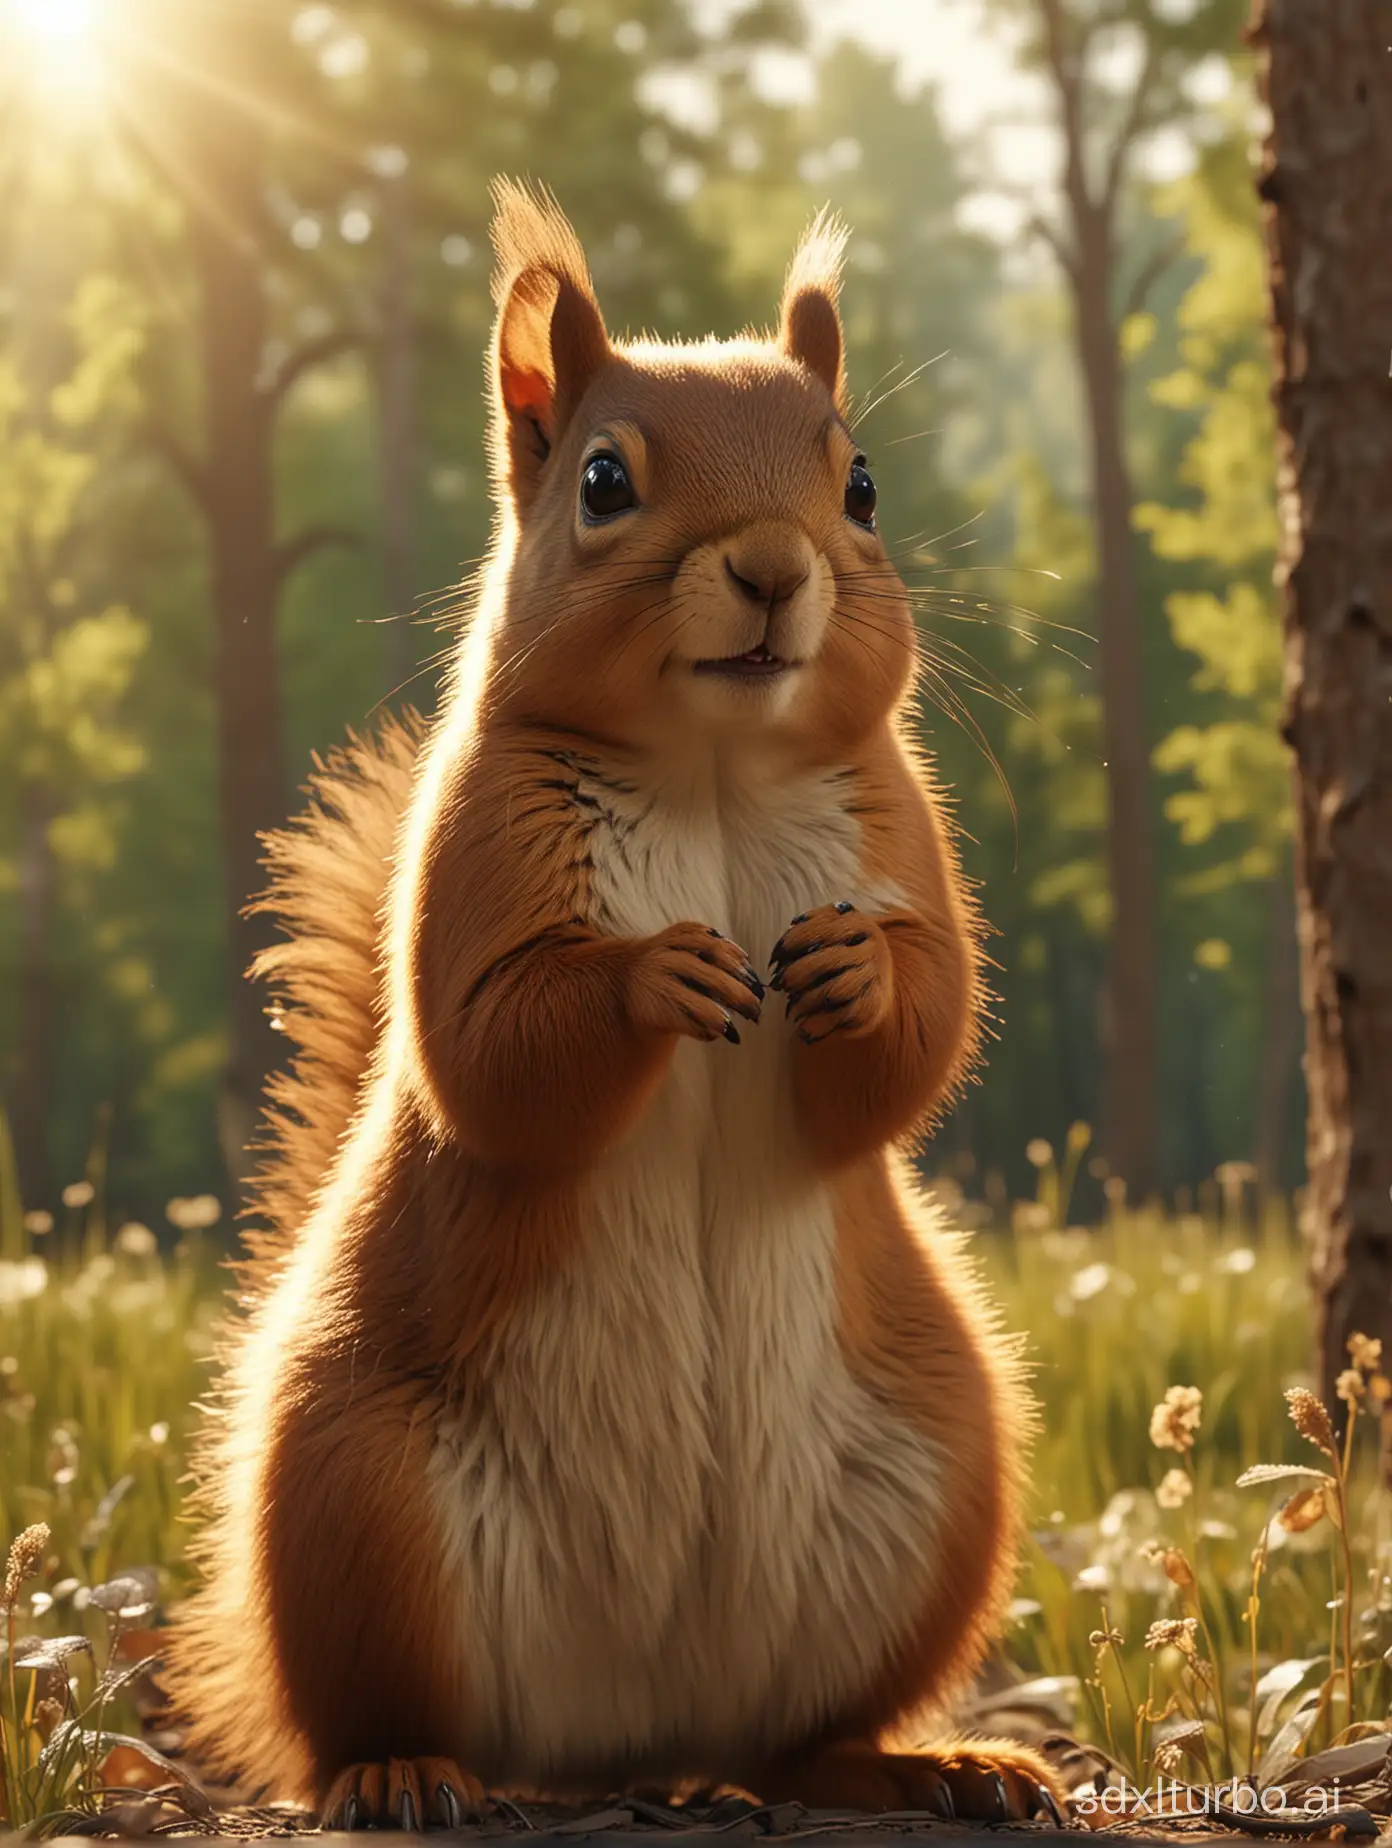 3D rendering, summer, a squirrel stands in the forest, brown fur, tears in its eyes, looking pitifully, (prairie background), small body, dappled sunlight, cinematic effects, adding details,